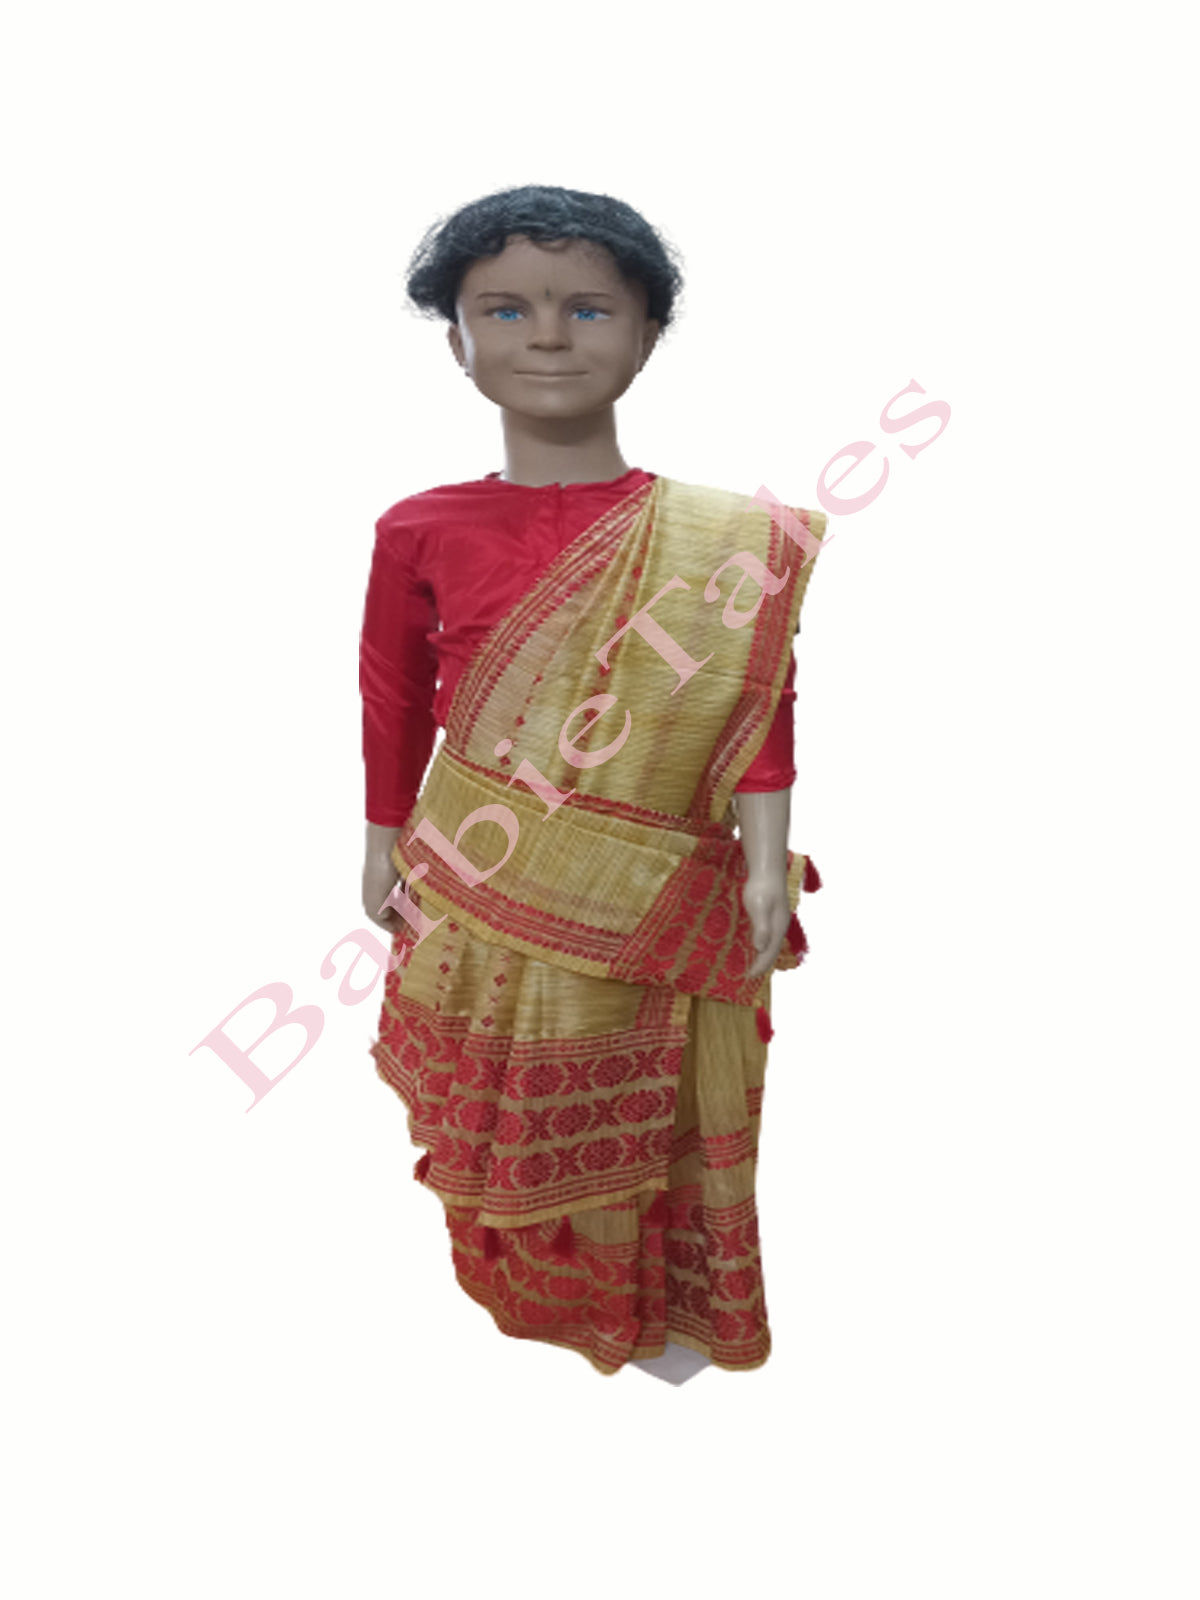 Buy Beige (Muga Color) Assam Silk Saree with Red Threadwork at Amazon.in